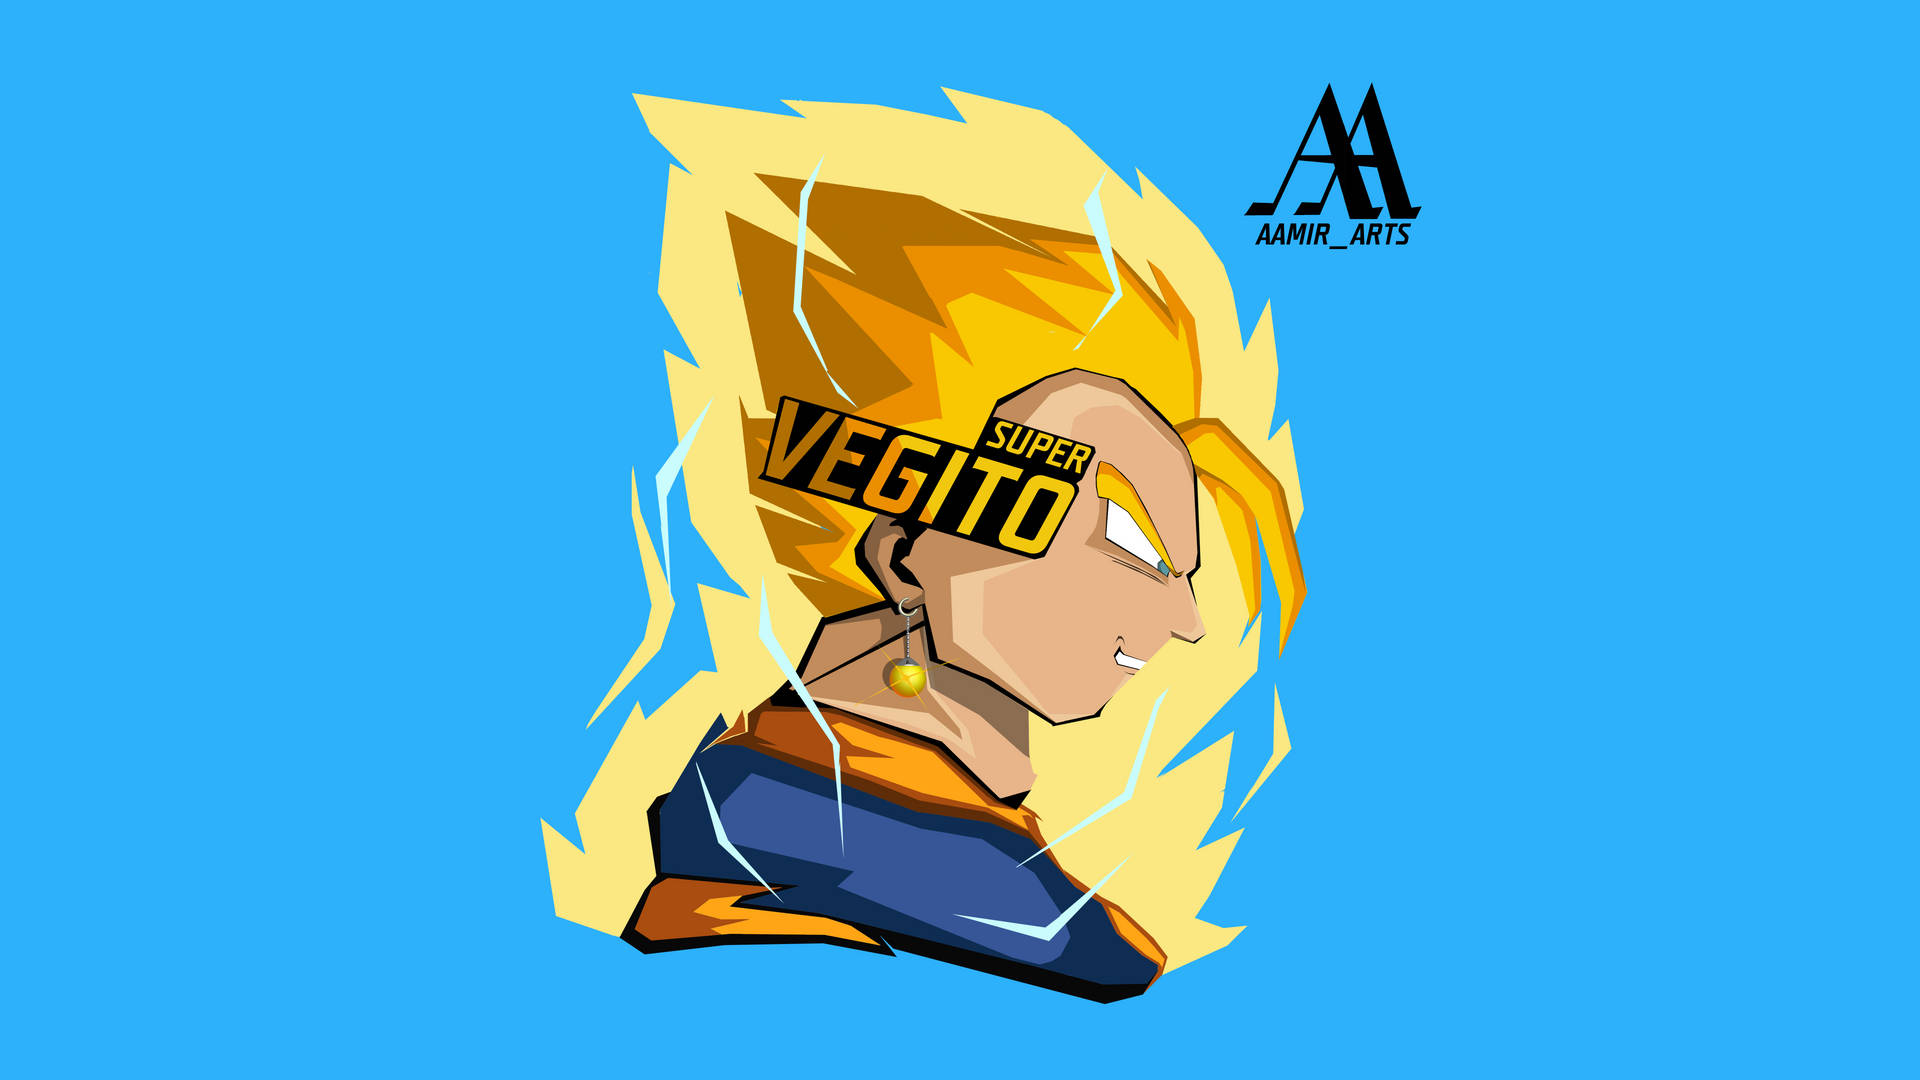 Blondevegito Blue (in The Context Of Computer Or Mobile Wallpaper) Would Be Translated To 